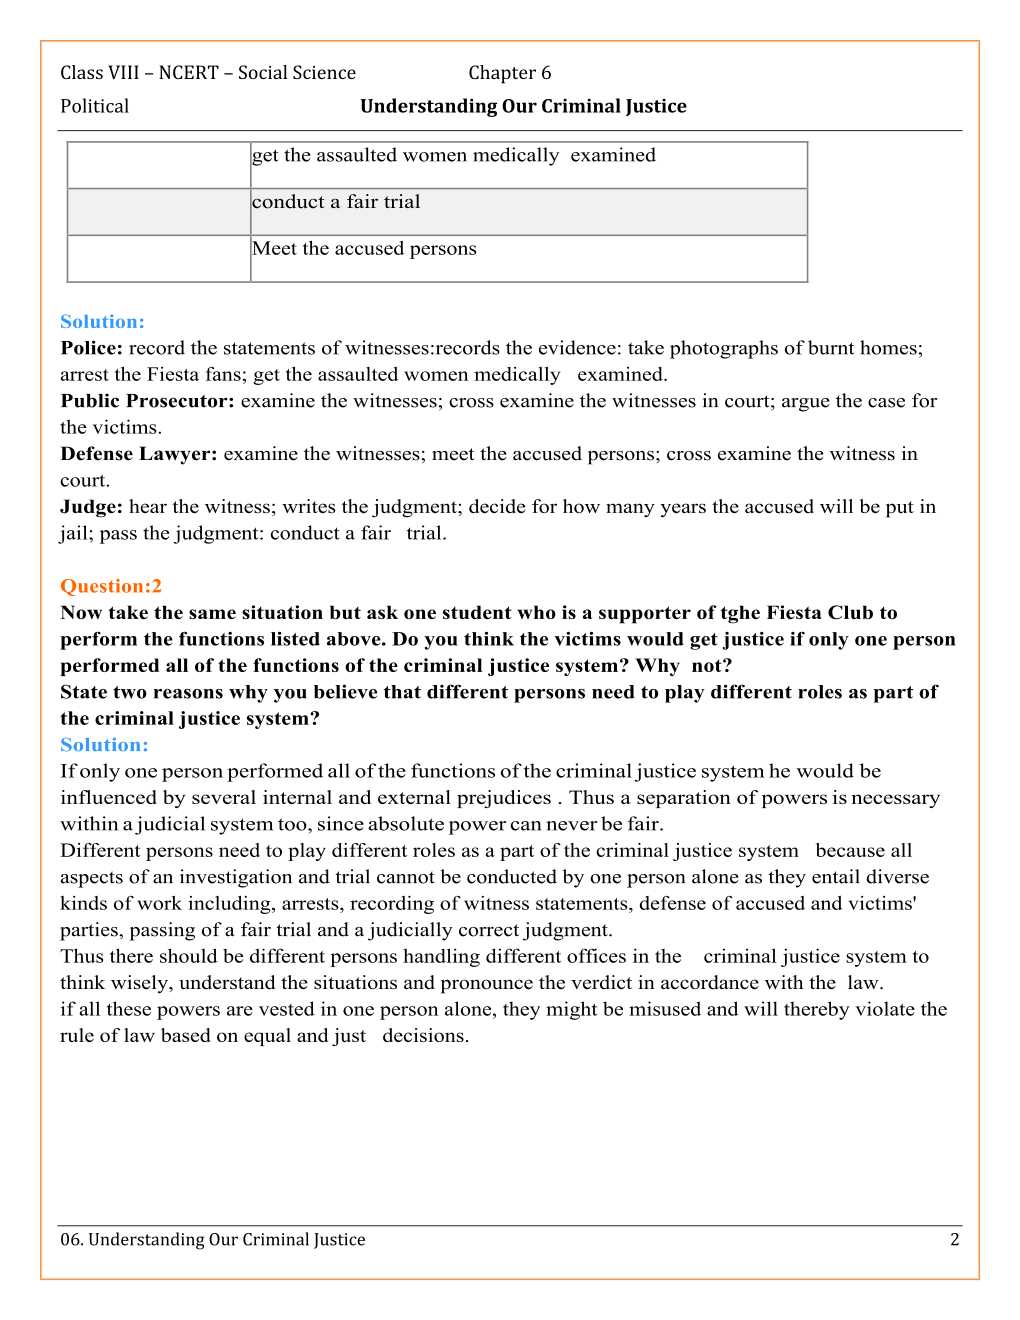 NCERT Solutions For Class 8 Social Science Social and Political Life Chapter 6